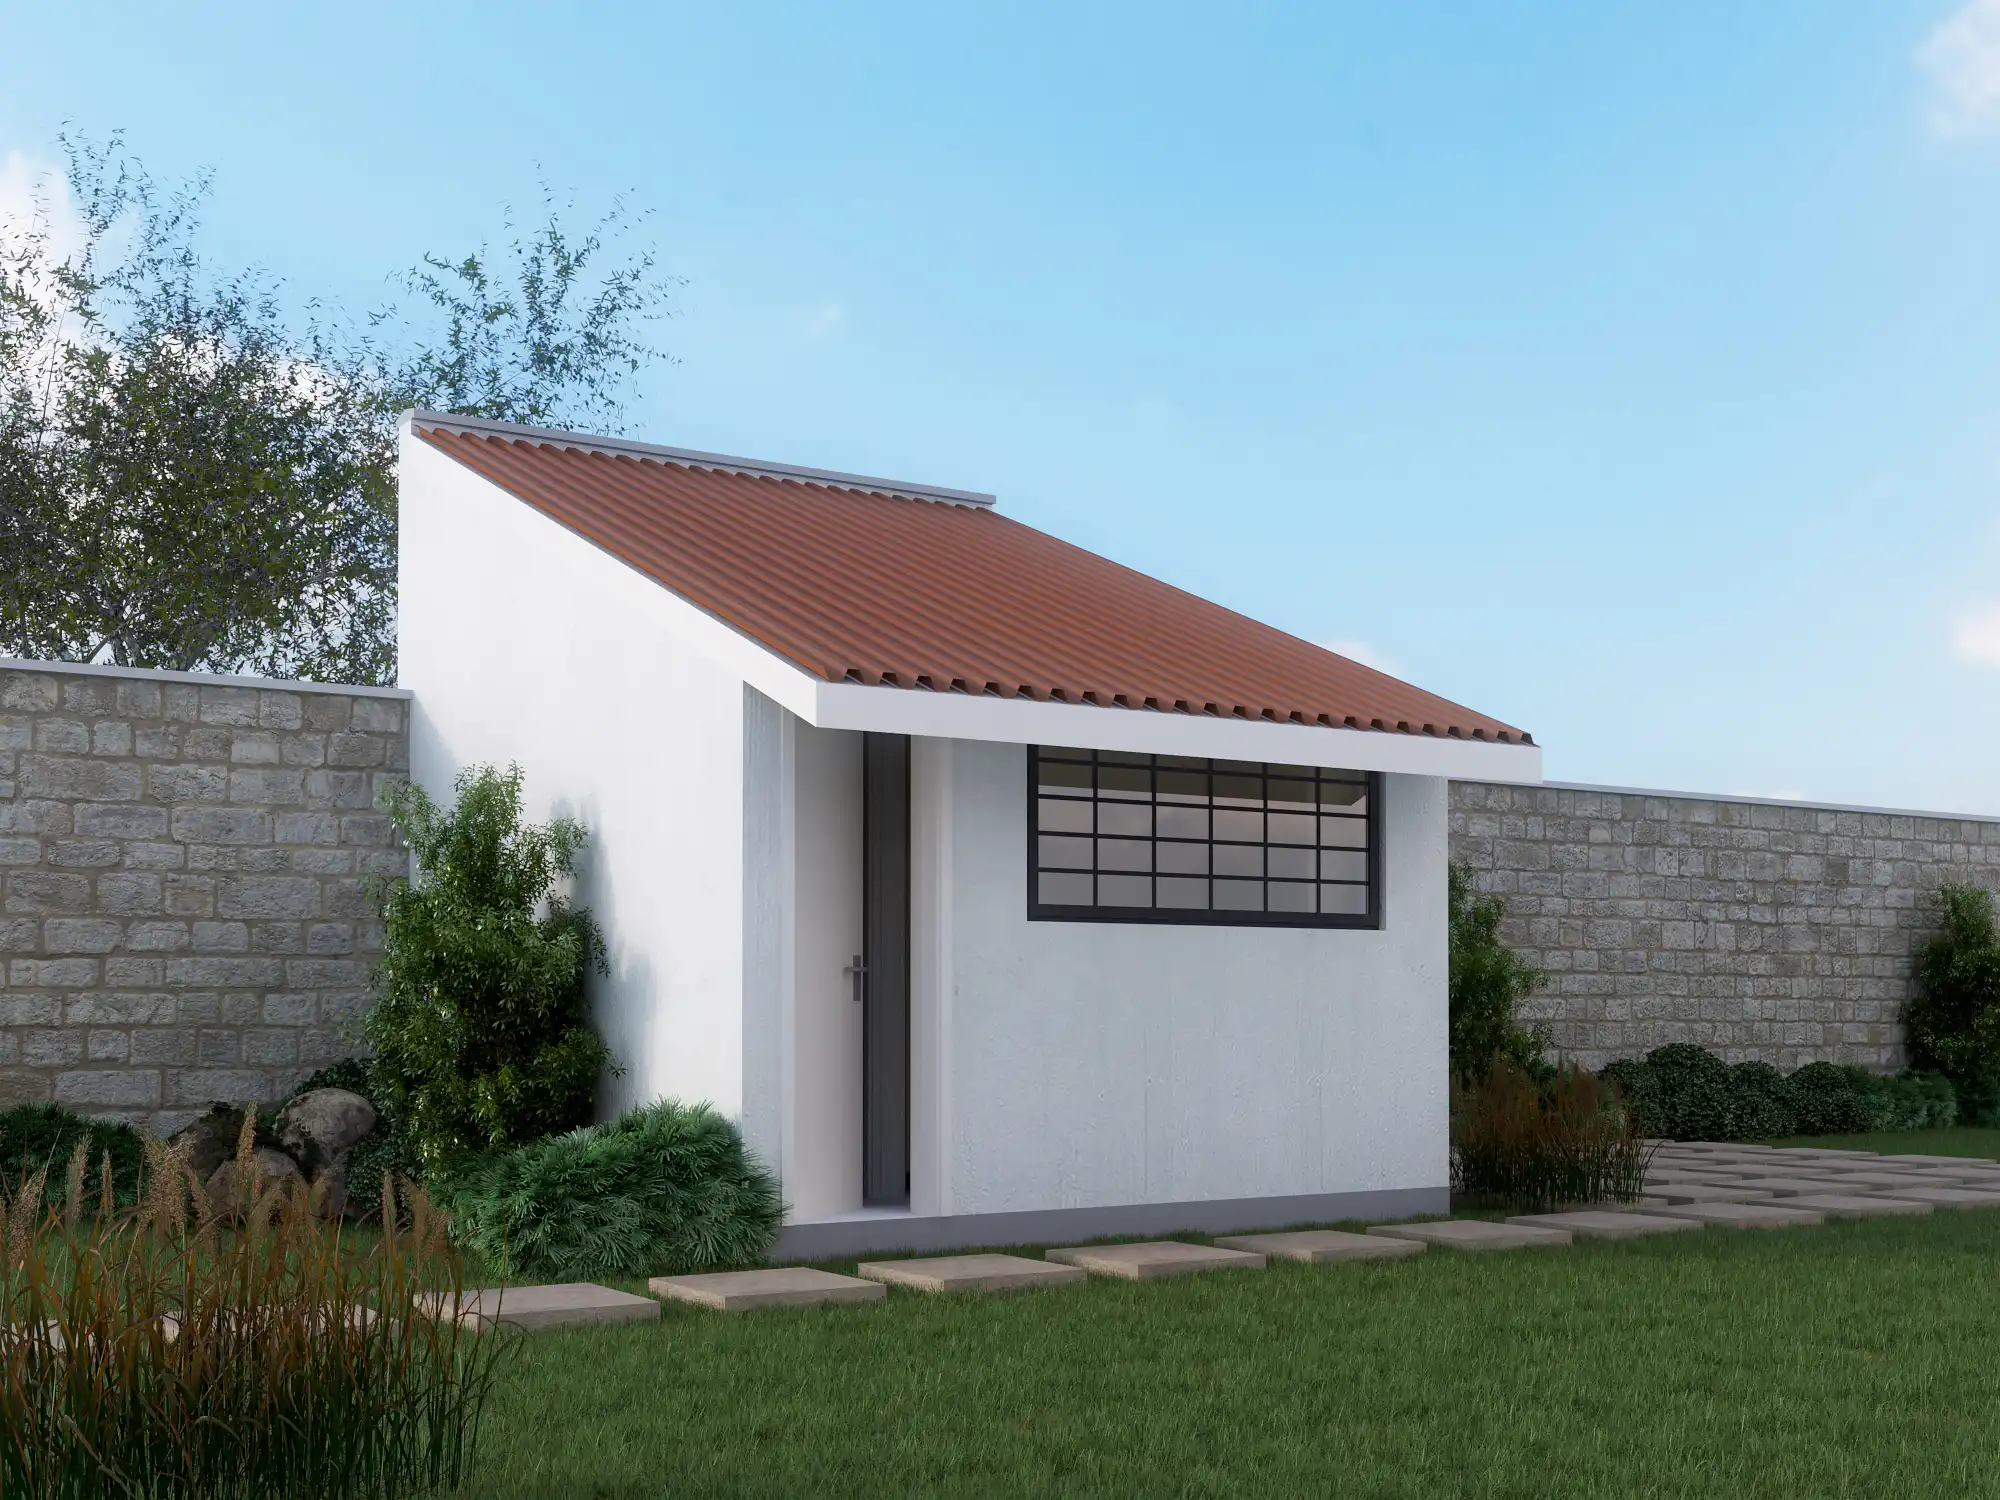 DSQ Module - DSQ.jpg from Inuua Tujenge house plans with 0 bedrooms and 0 bathrooms. ( module )